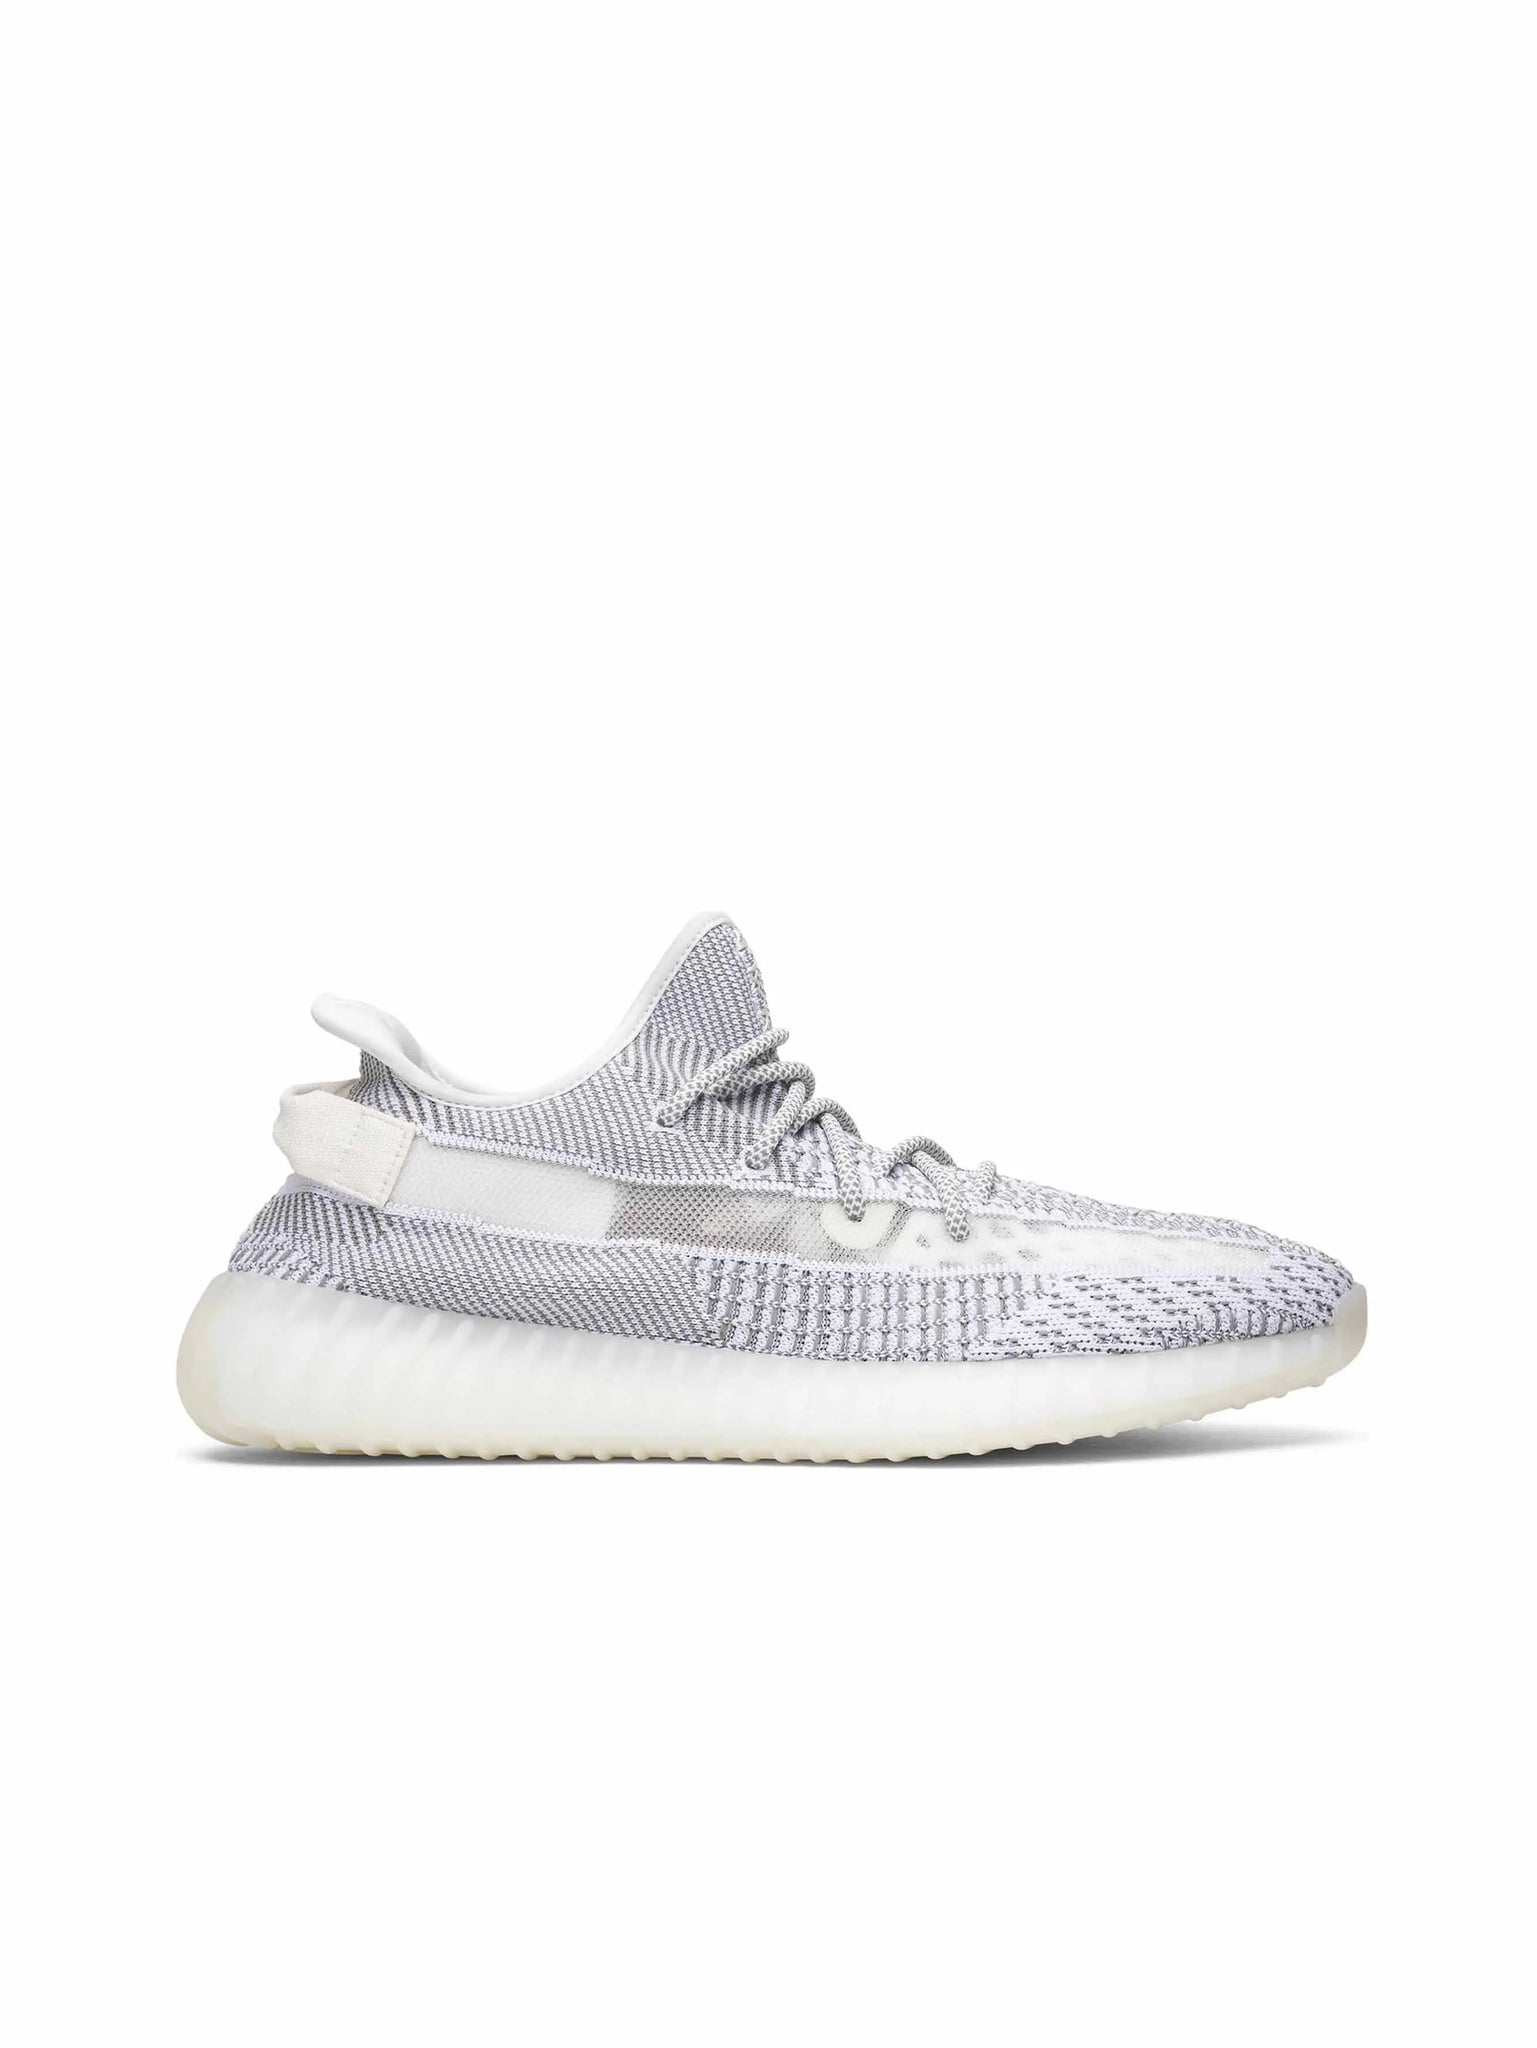 adidas Yeezy Boost 350 V2 Static (Non-Reflective) (2018/2023) Prior